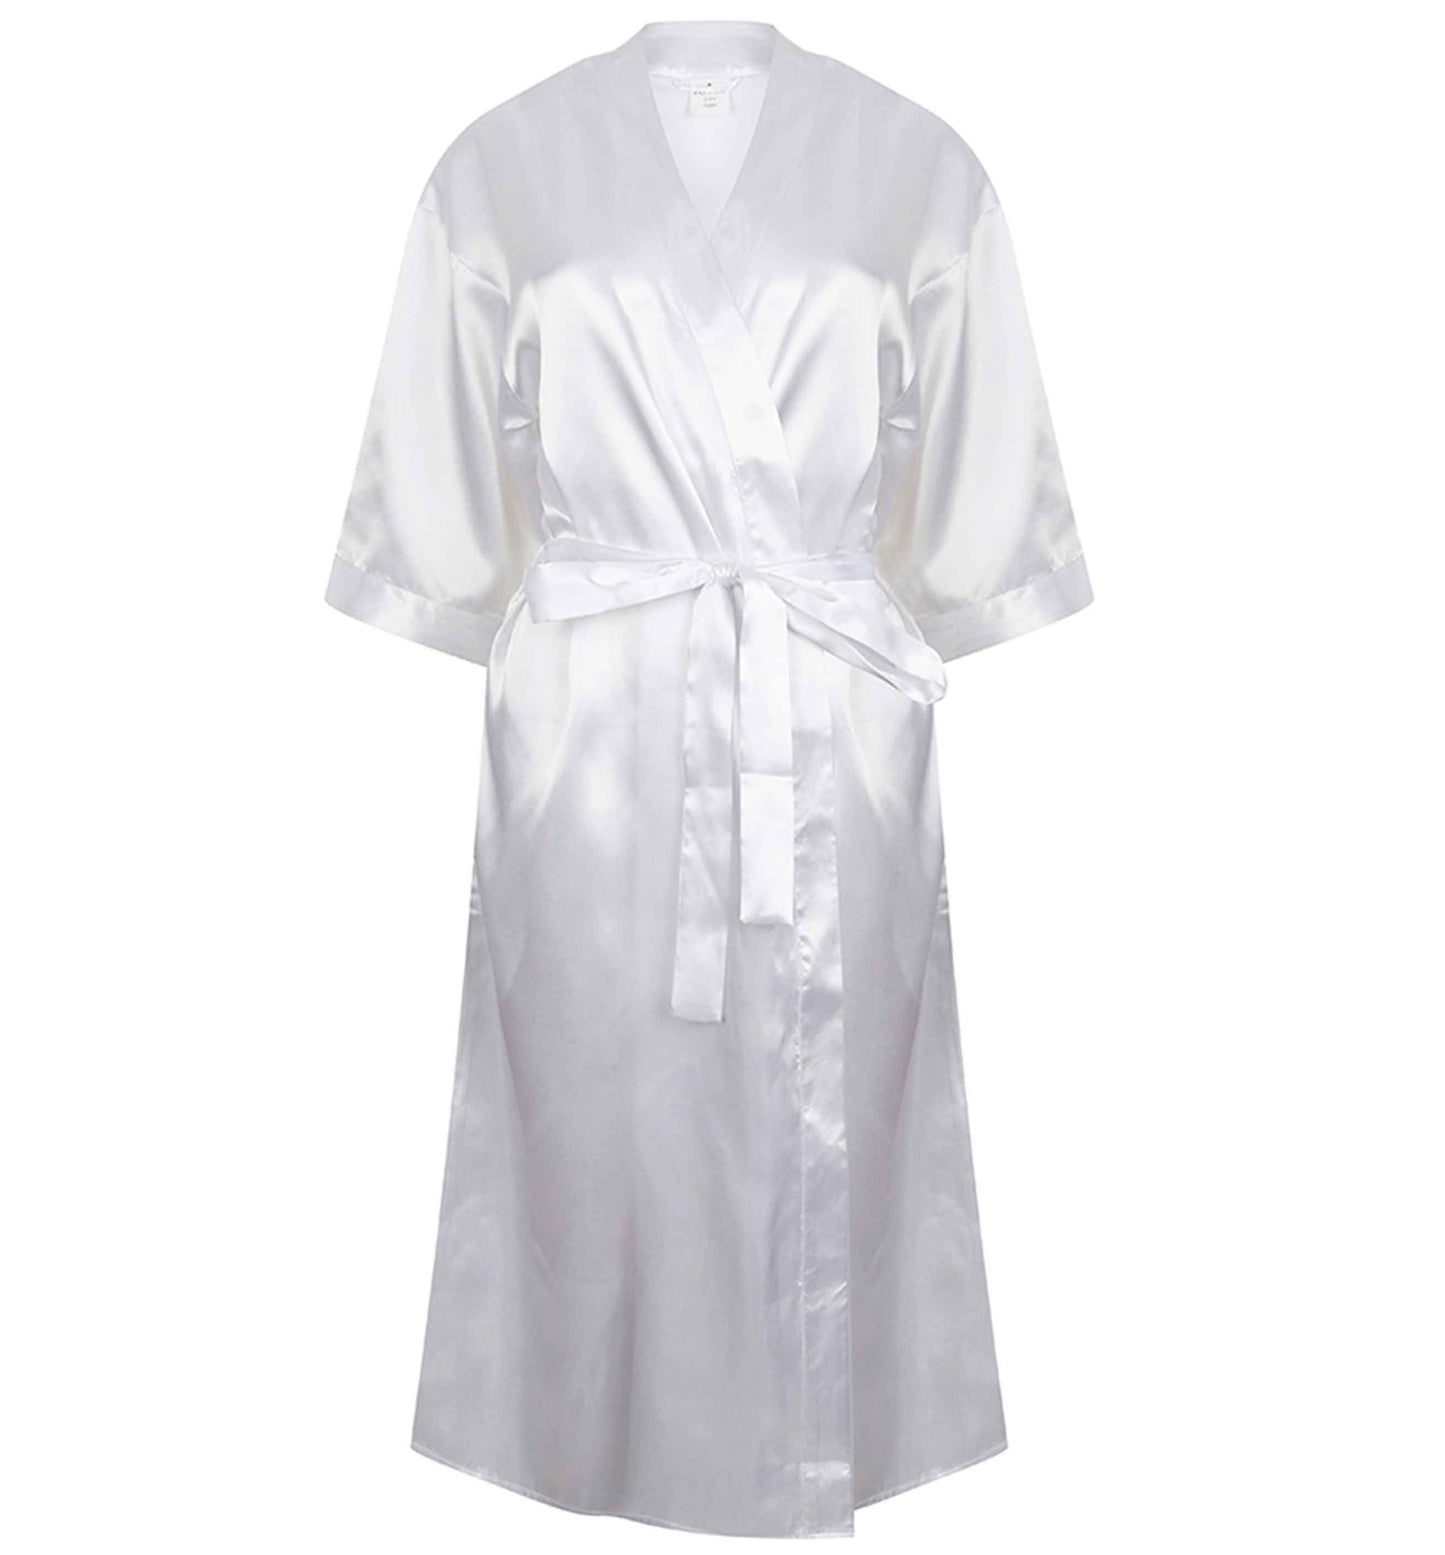 Don't get your tinsel in a tangle | 8-18 | Kimono style satin robe | Ladies dressing gown